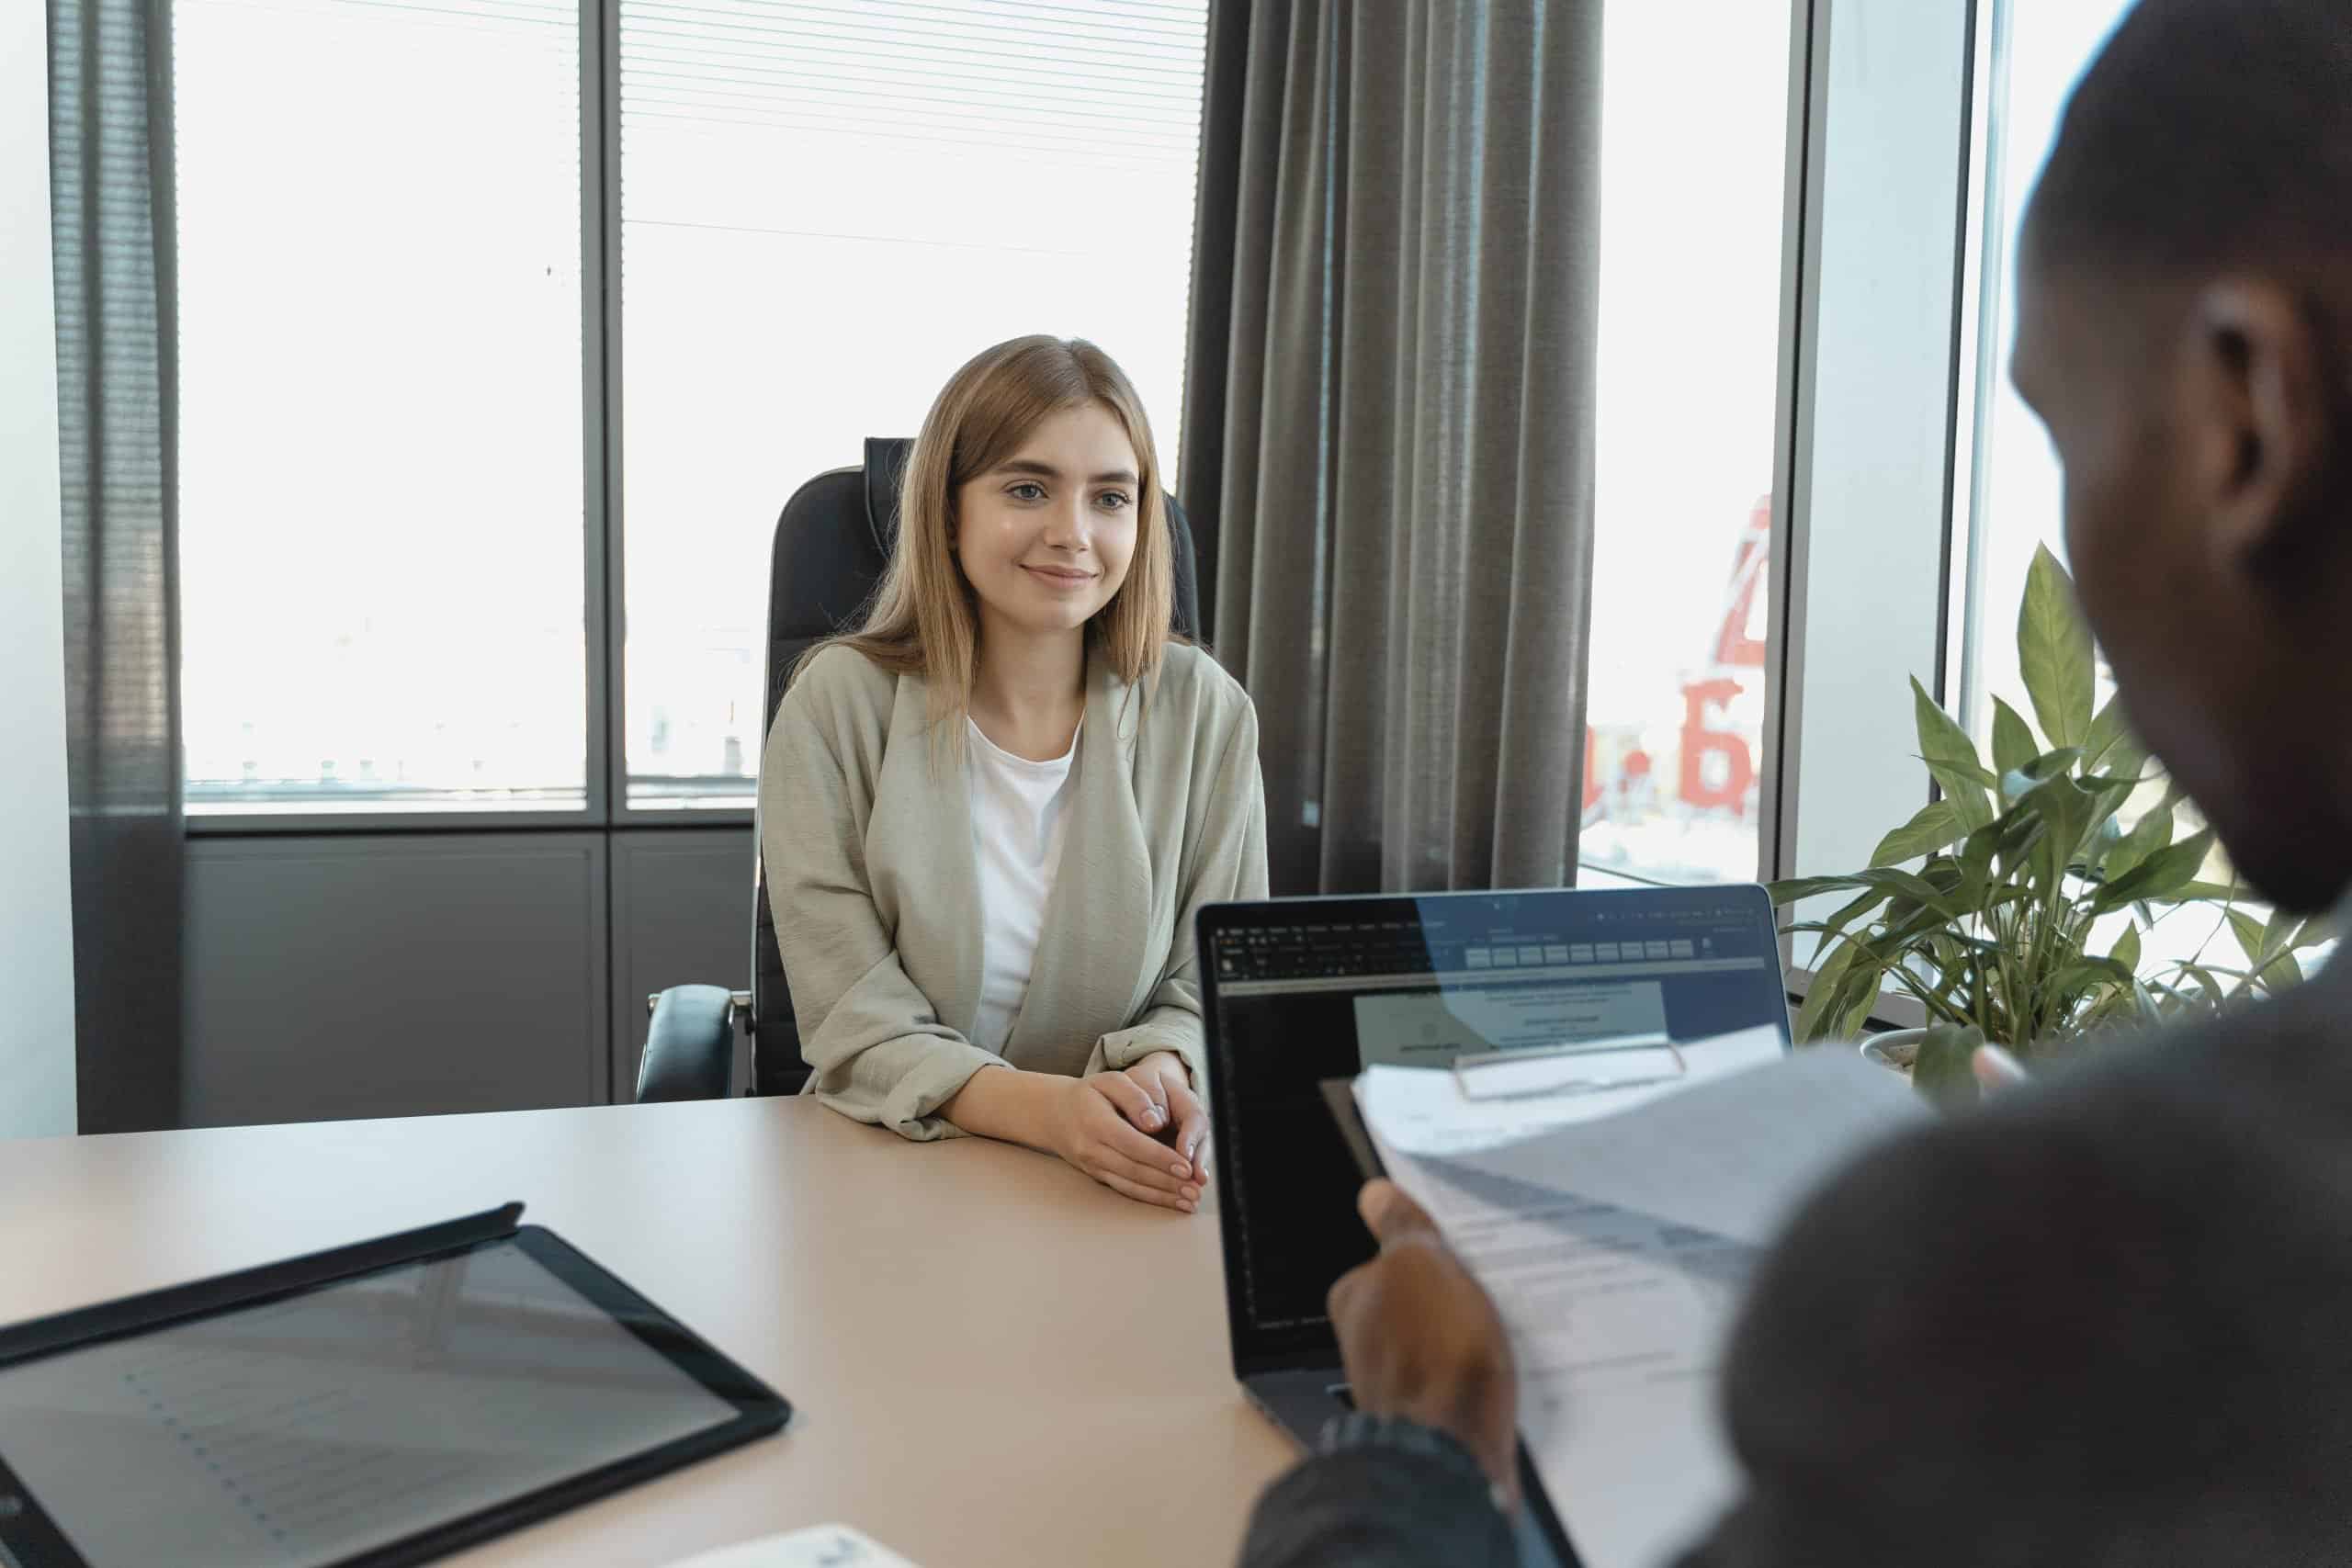 The questions you need to be asking at a job interview